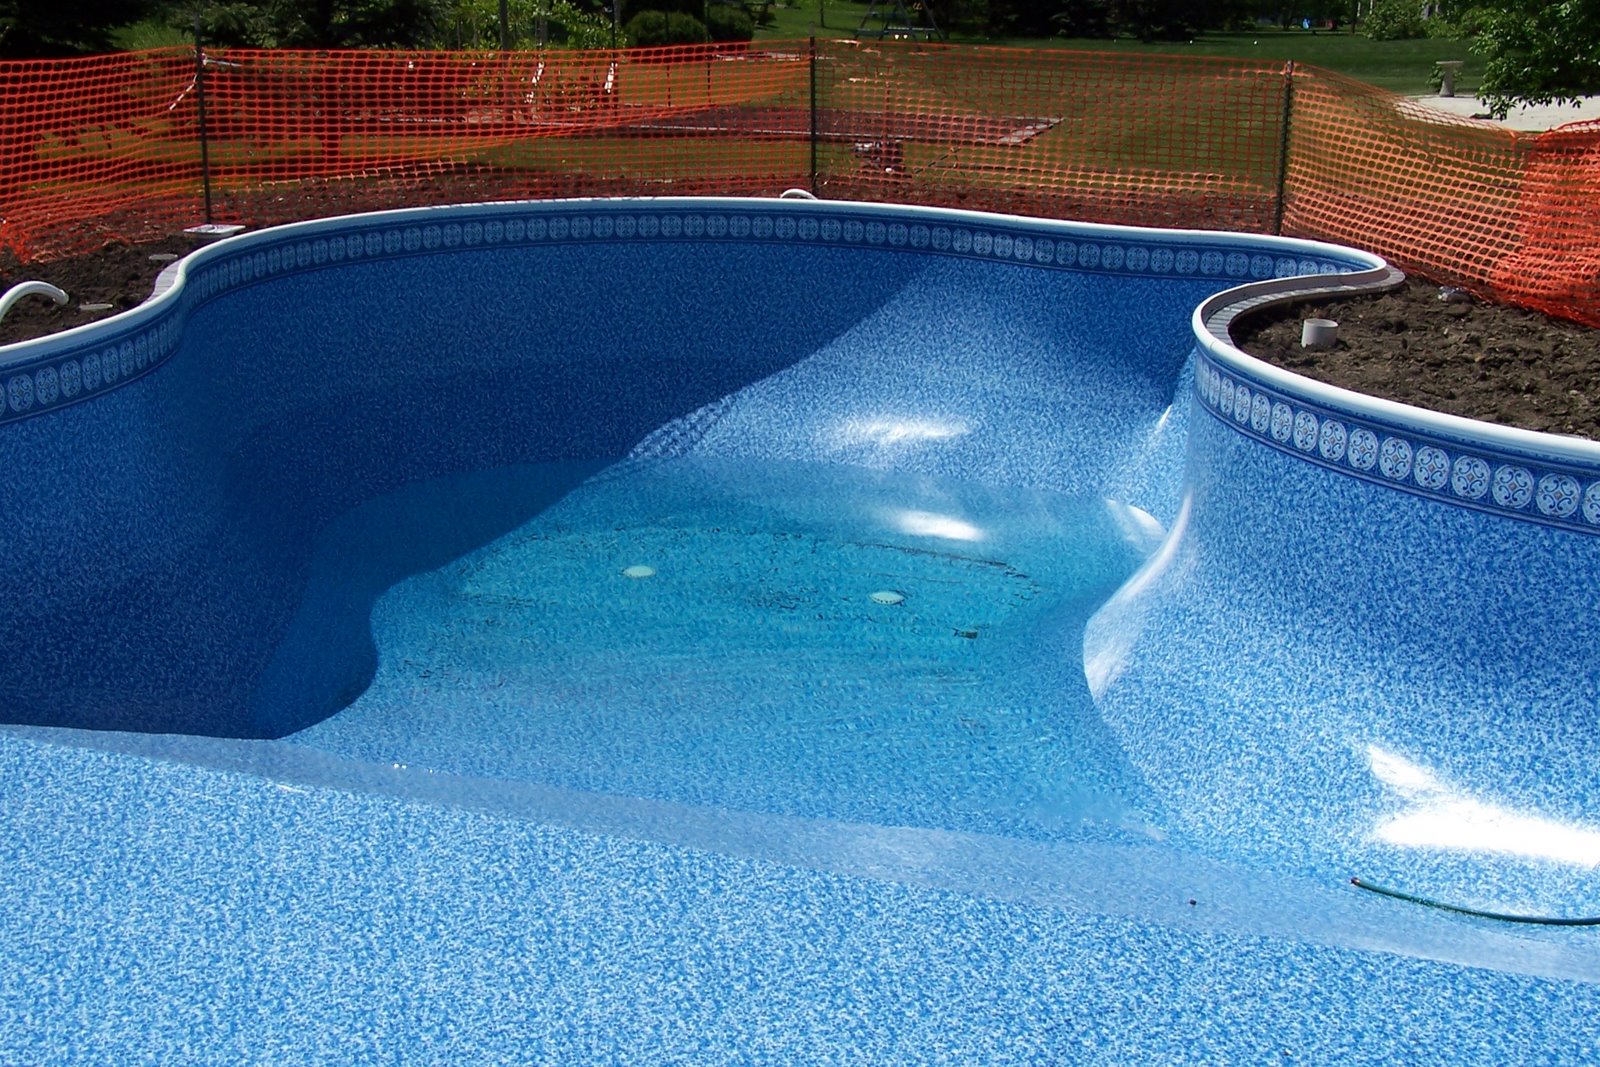 [Pool+Pictures+034.jpg]